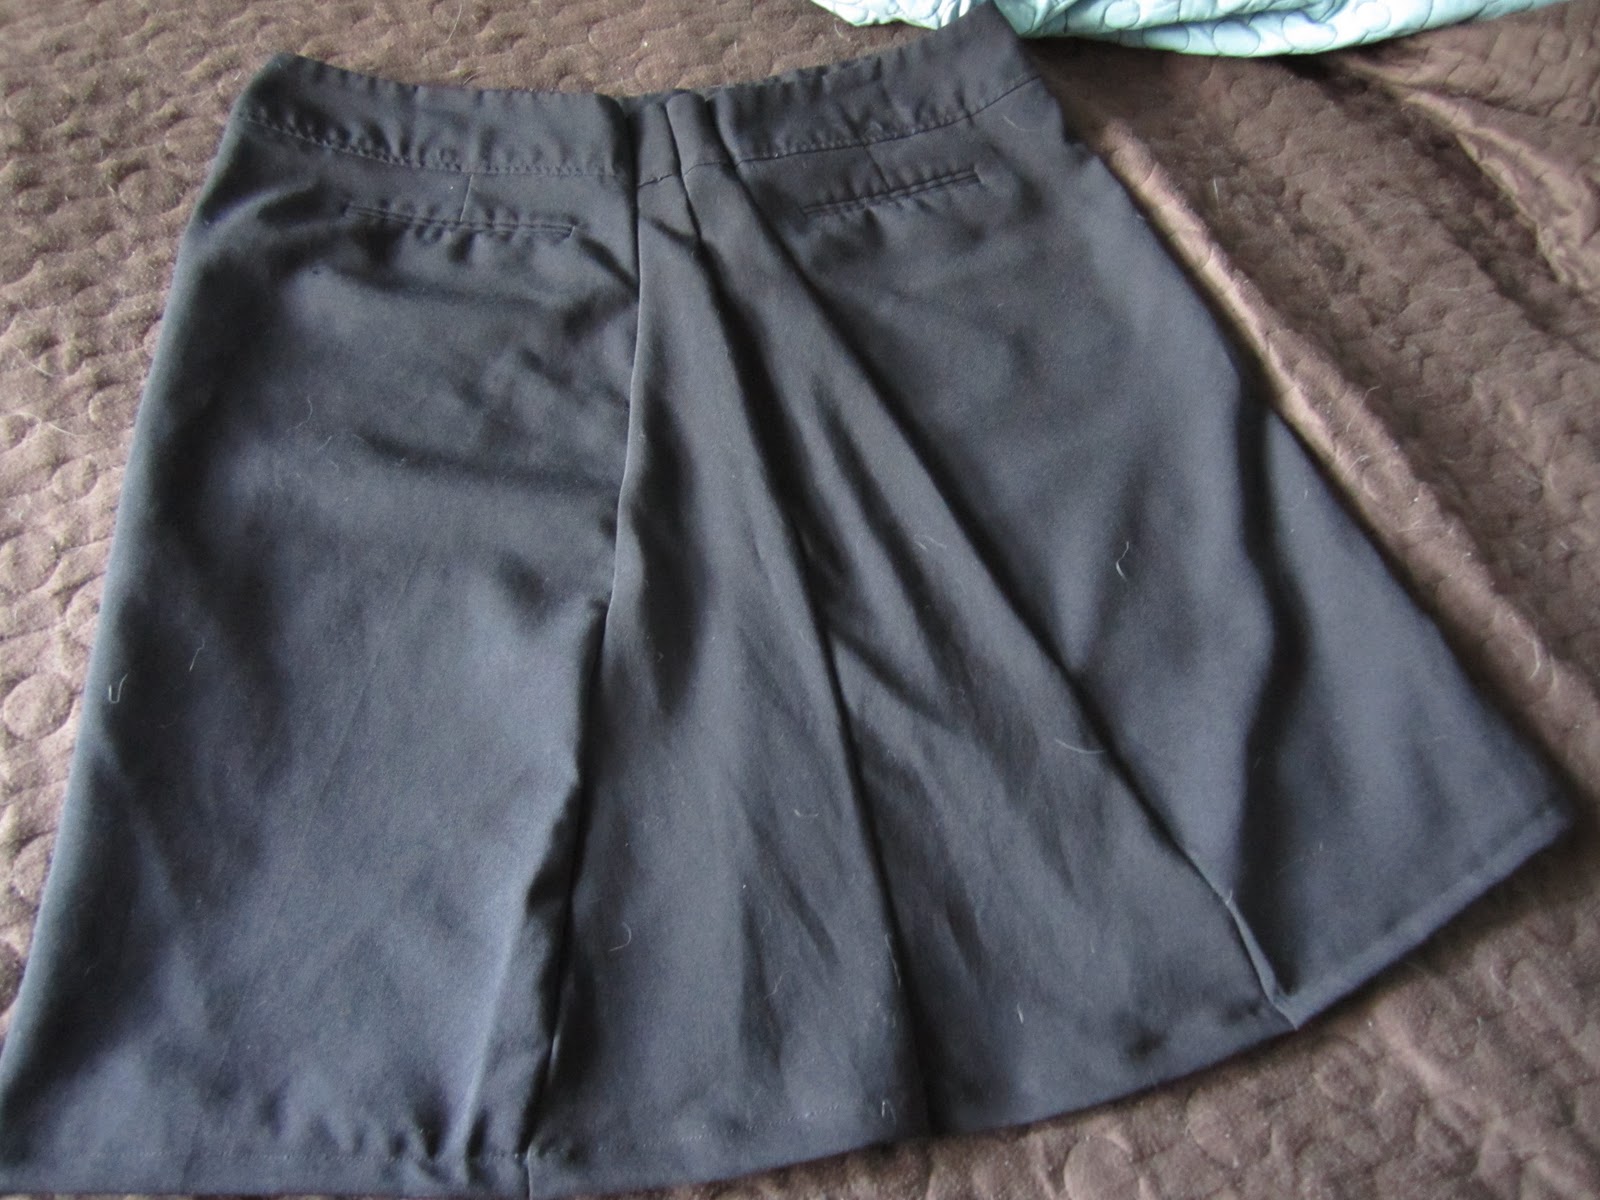 Busy Fingers: Turning pants into a skirt